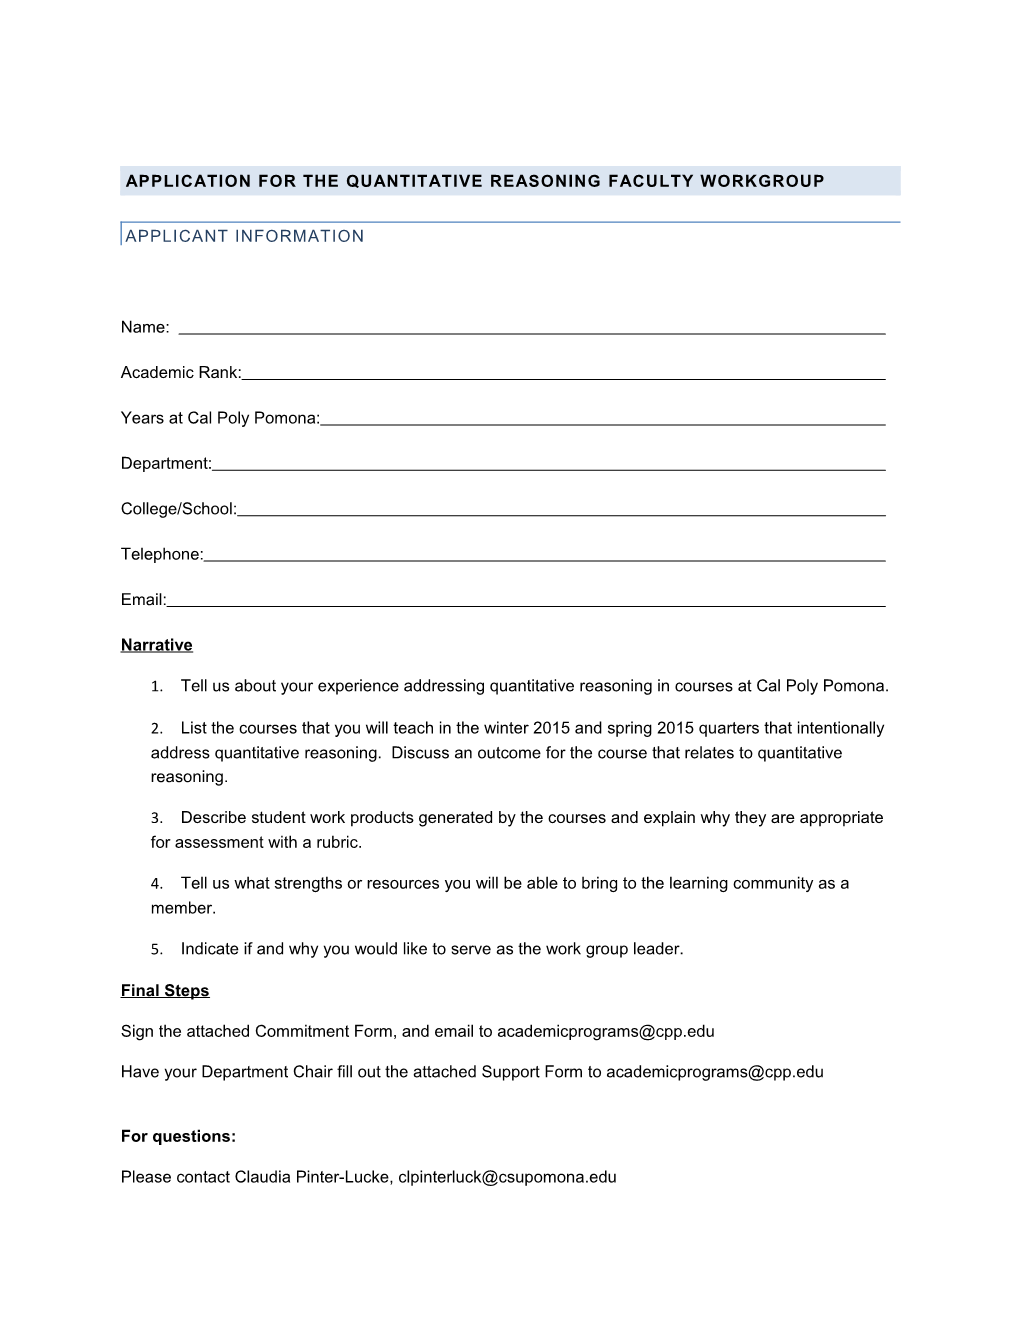 Application for the Quantitative Reasoning FACULTY WORKGROUP